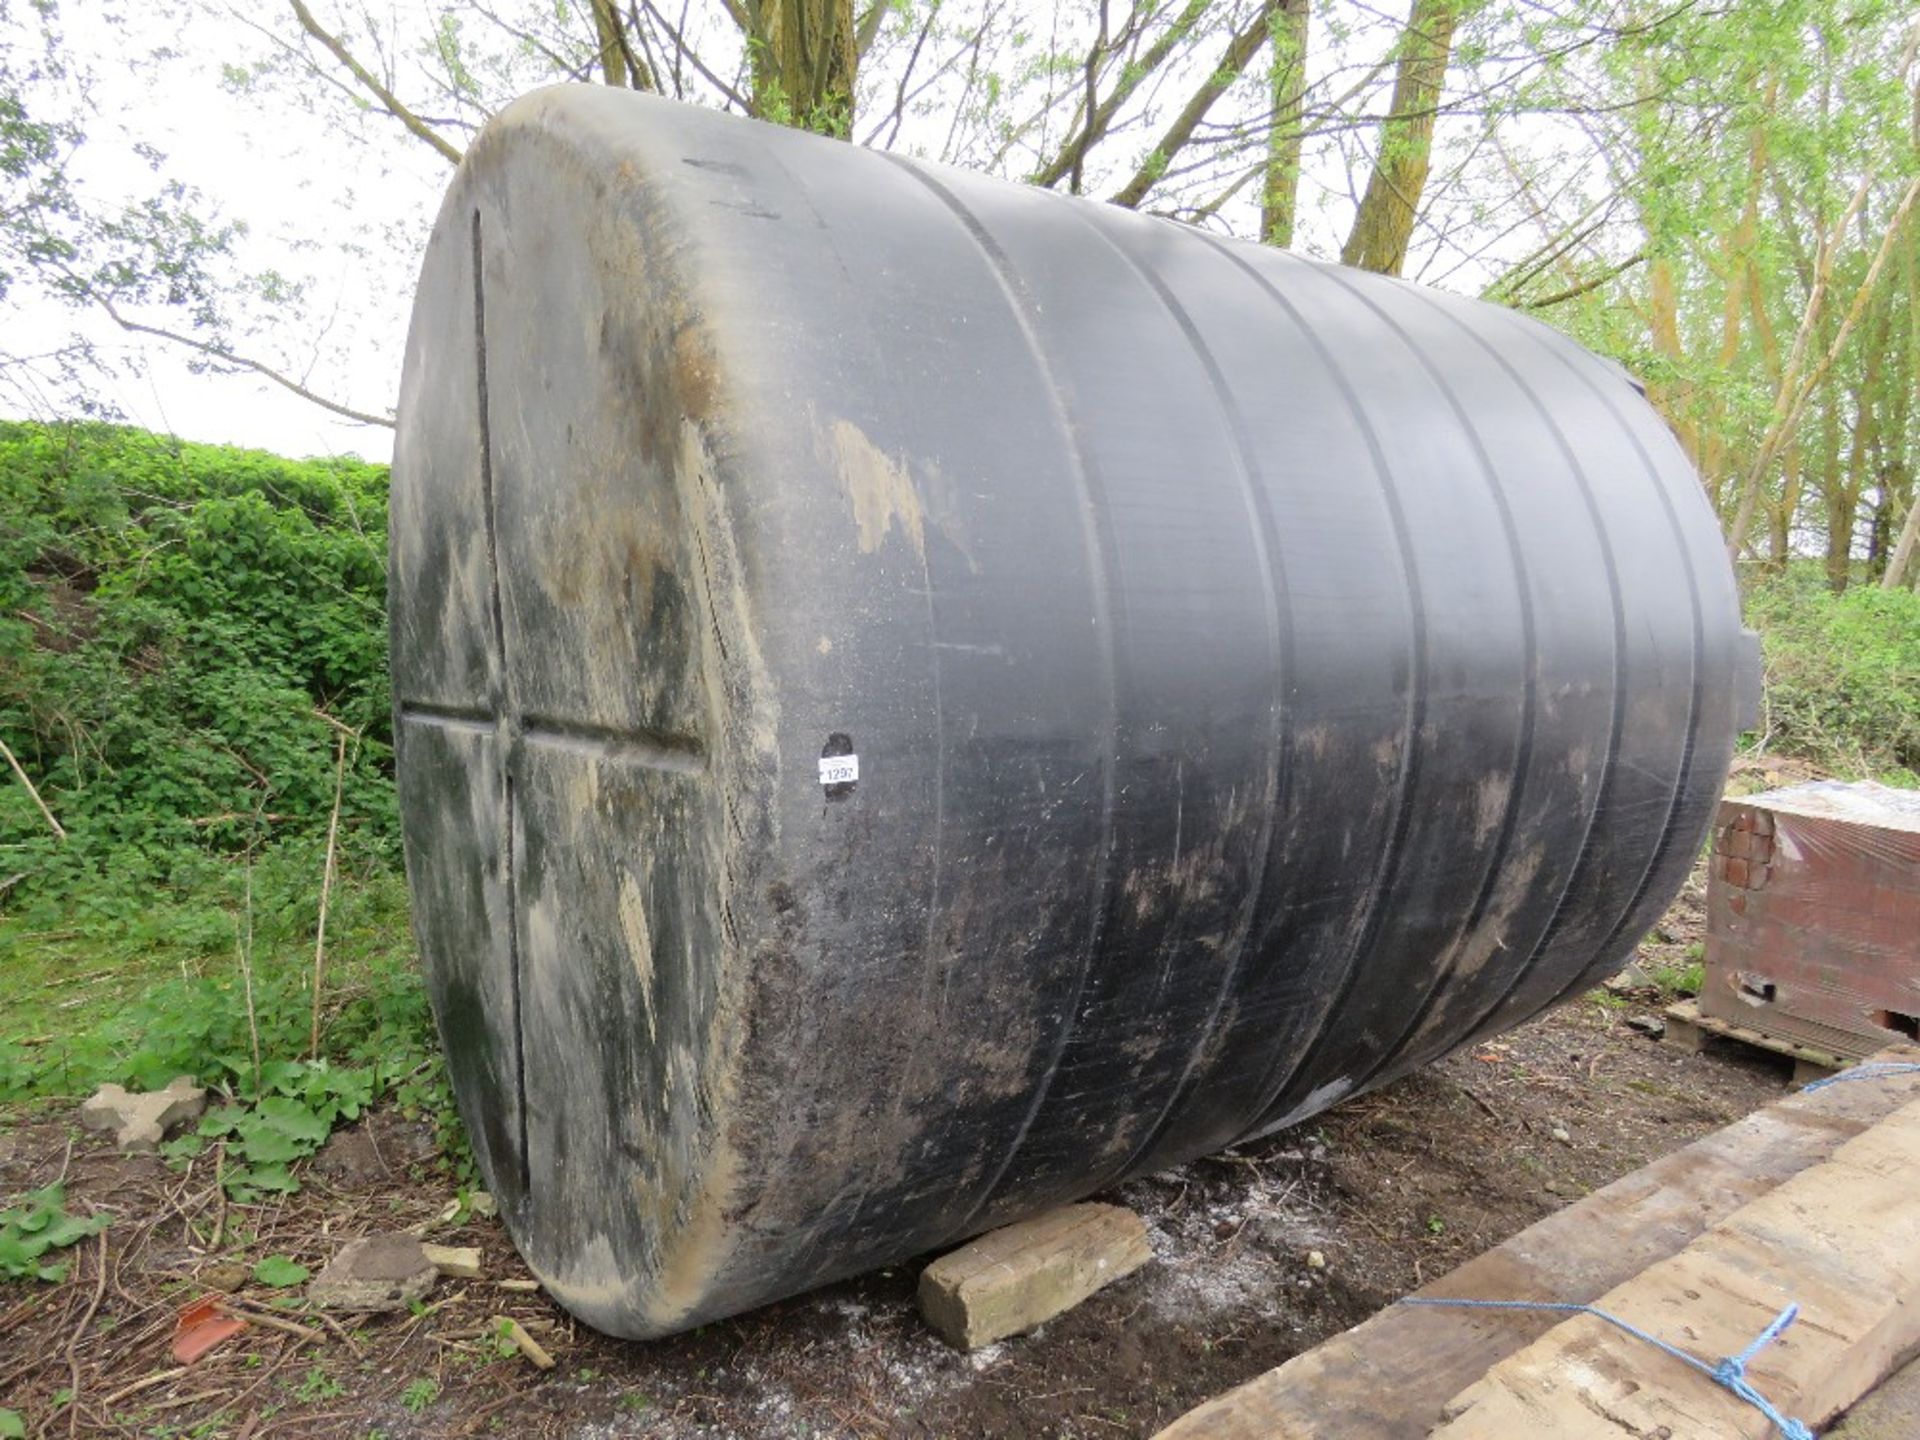 EXTRA LARGE WATER STORAGE TANK 10FT HEIGHT X 9FT DIAMETER APPROX. DAMAGED IN THE MIDDLE AS SHOWN. EX - Image 6 of 10